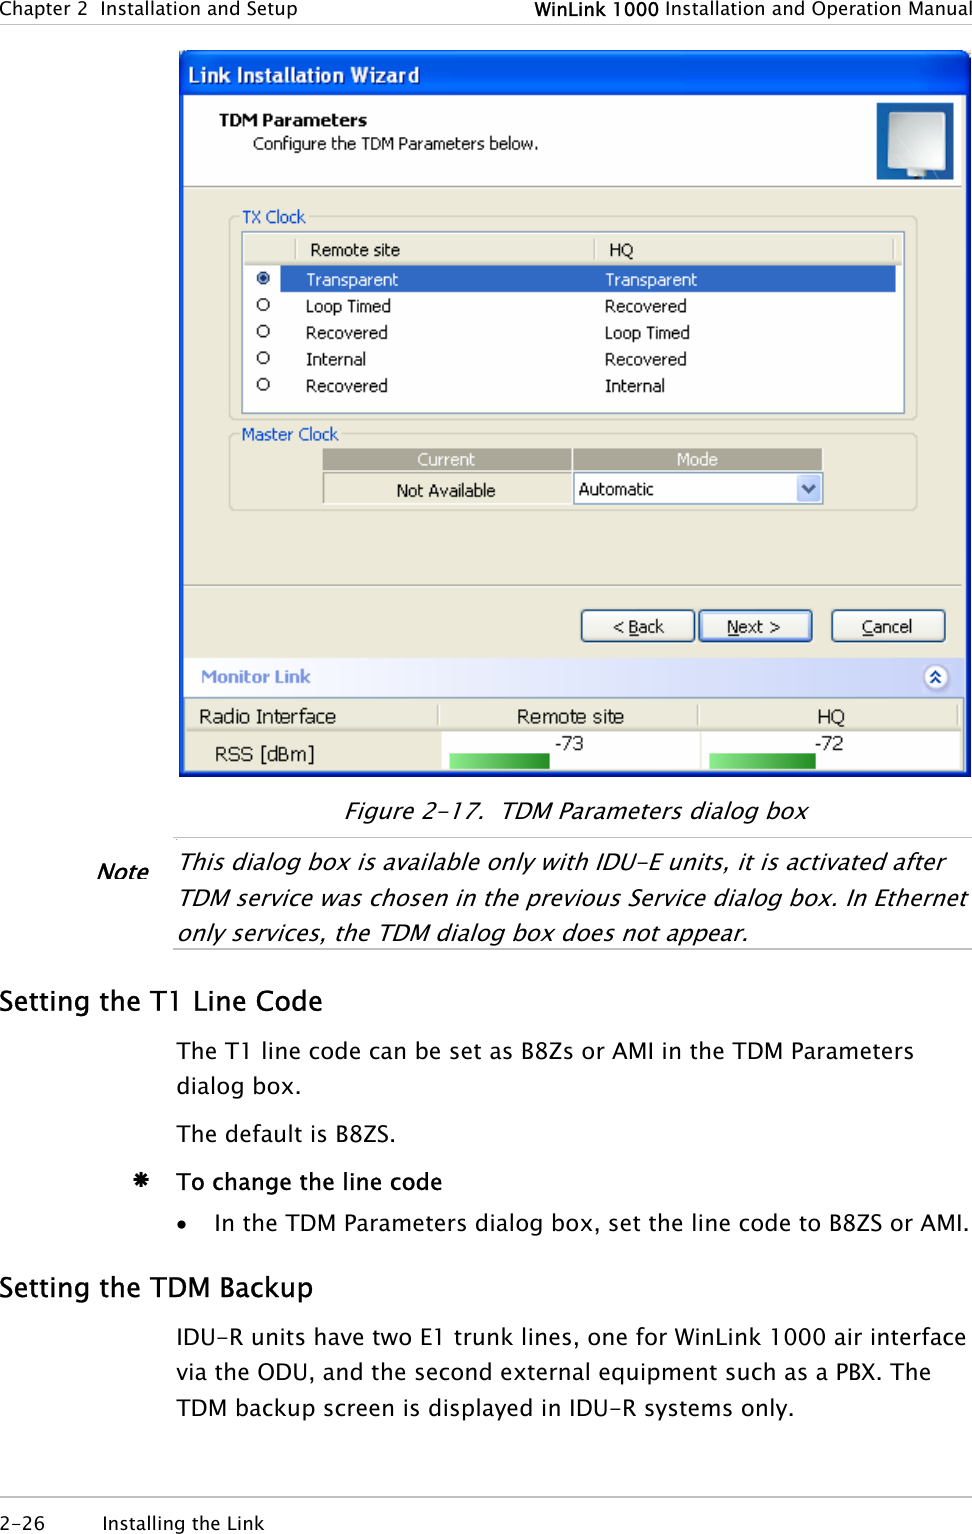 Chapter  2  Installation and Setup  WinLink 1000 Installation and Operation Manual  Figure  2-17.  TDM Parameters dialog box •  This dialog box is available only with IDU-E units, it is activated a ter TDM service was chosen in the previous Service dialog box. In Ethernet only services, the TDM dialog box does not appear. fNote Setting the T1 Line Code The T1 line code can be set as B8Zs or AMI in the TDM Parameters dialog box. The default is B8ZS. Æ To change the line code • In the TDM Parameters dialog box, set the line code to B8ZS or AMI. Setting the TDM Backup IDU-R units have two E1 trunk lines, one for WinLink 1000 air interface via the ODU, and the second external equipment such as a PBX. The TDM backup screen is displayed in IDU-R systems only. 2-26 Installing the Link   